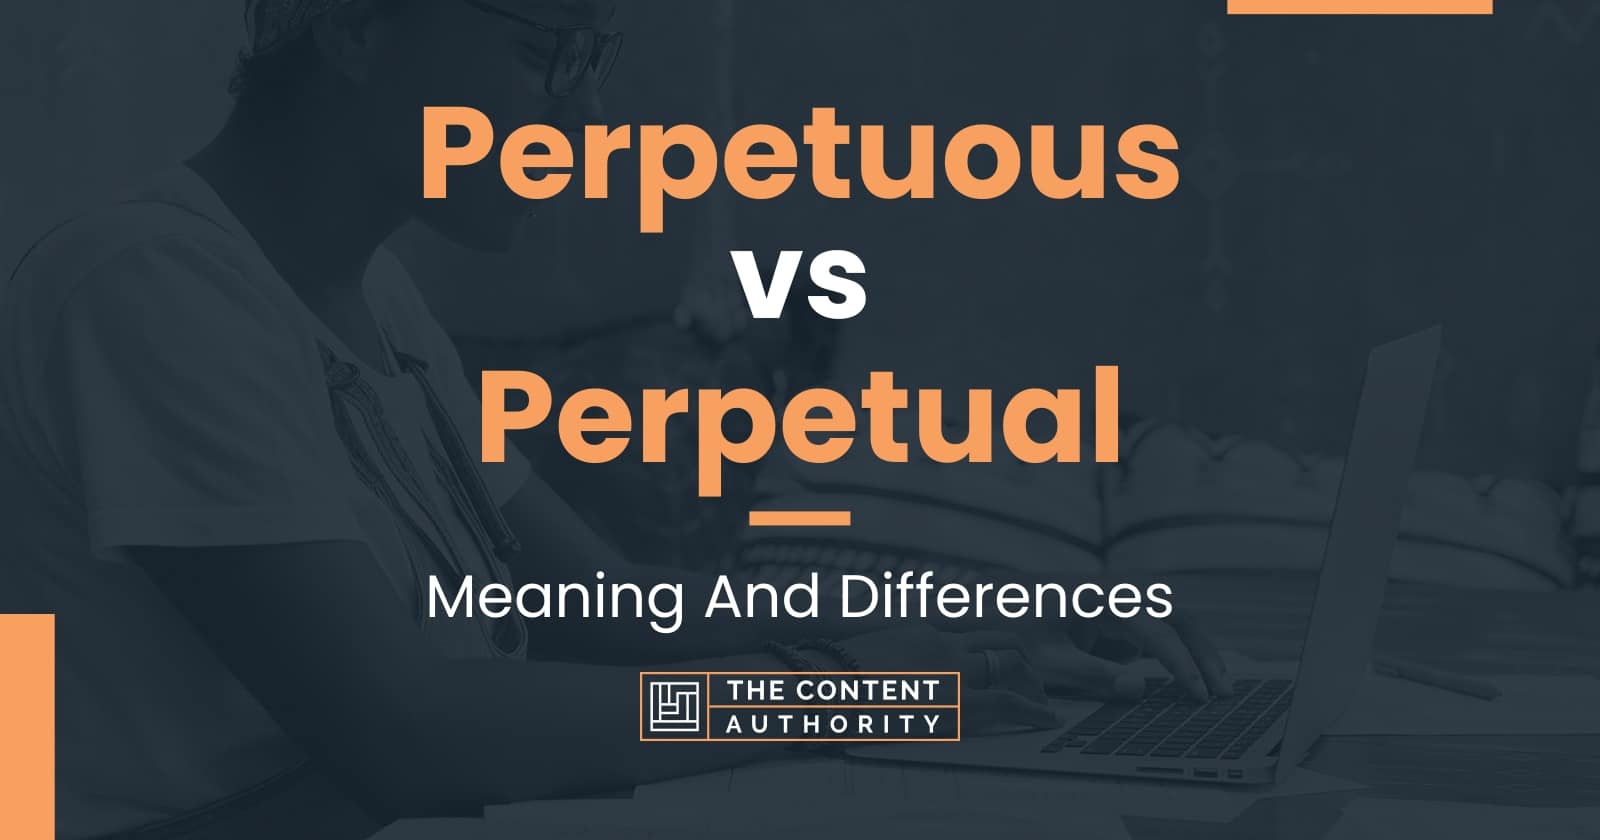 Perpetuous vs Perpetual: Meaning And Differences